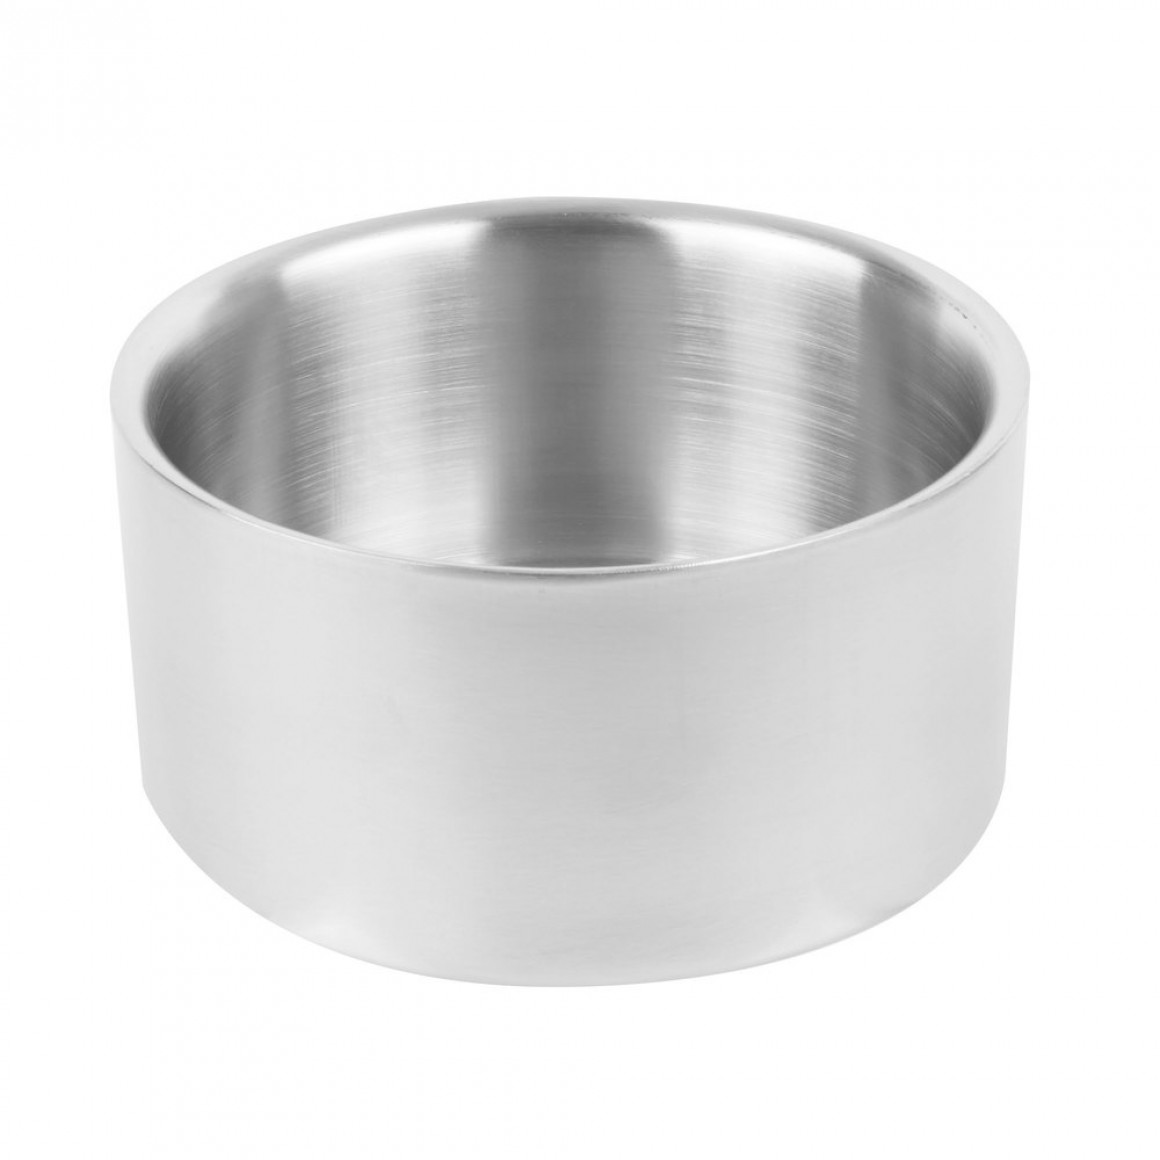 STAINLESS STEEL, SATIN BOWL, DOUBLE WALL, 34 OZ.